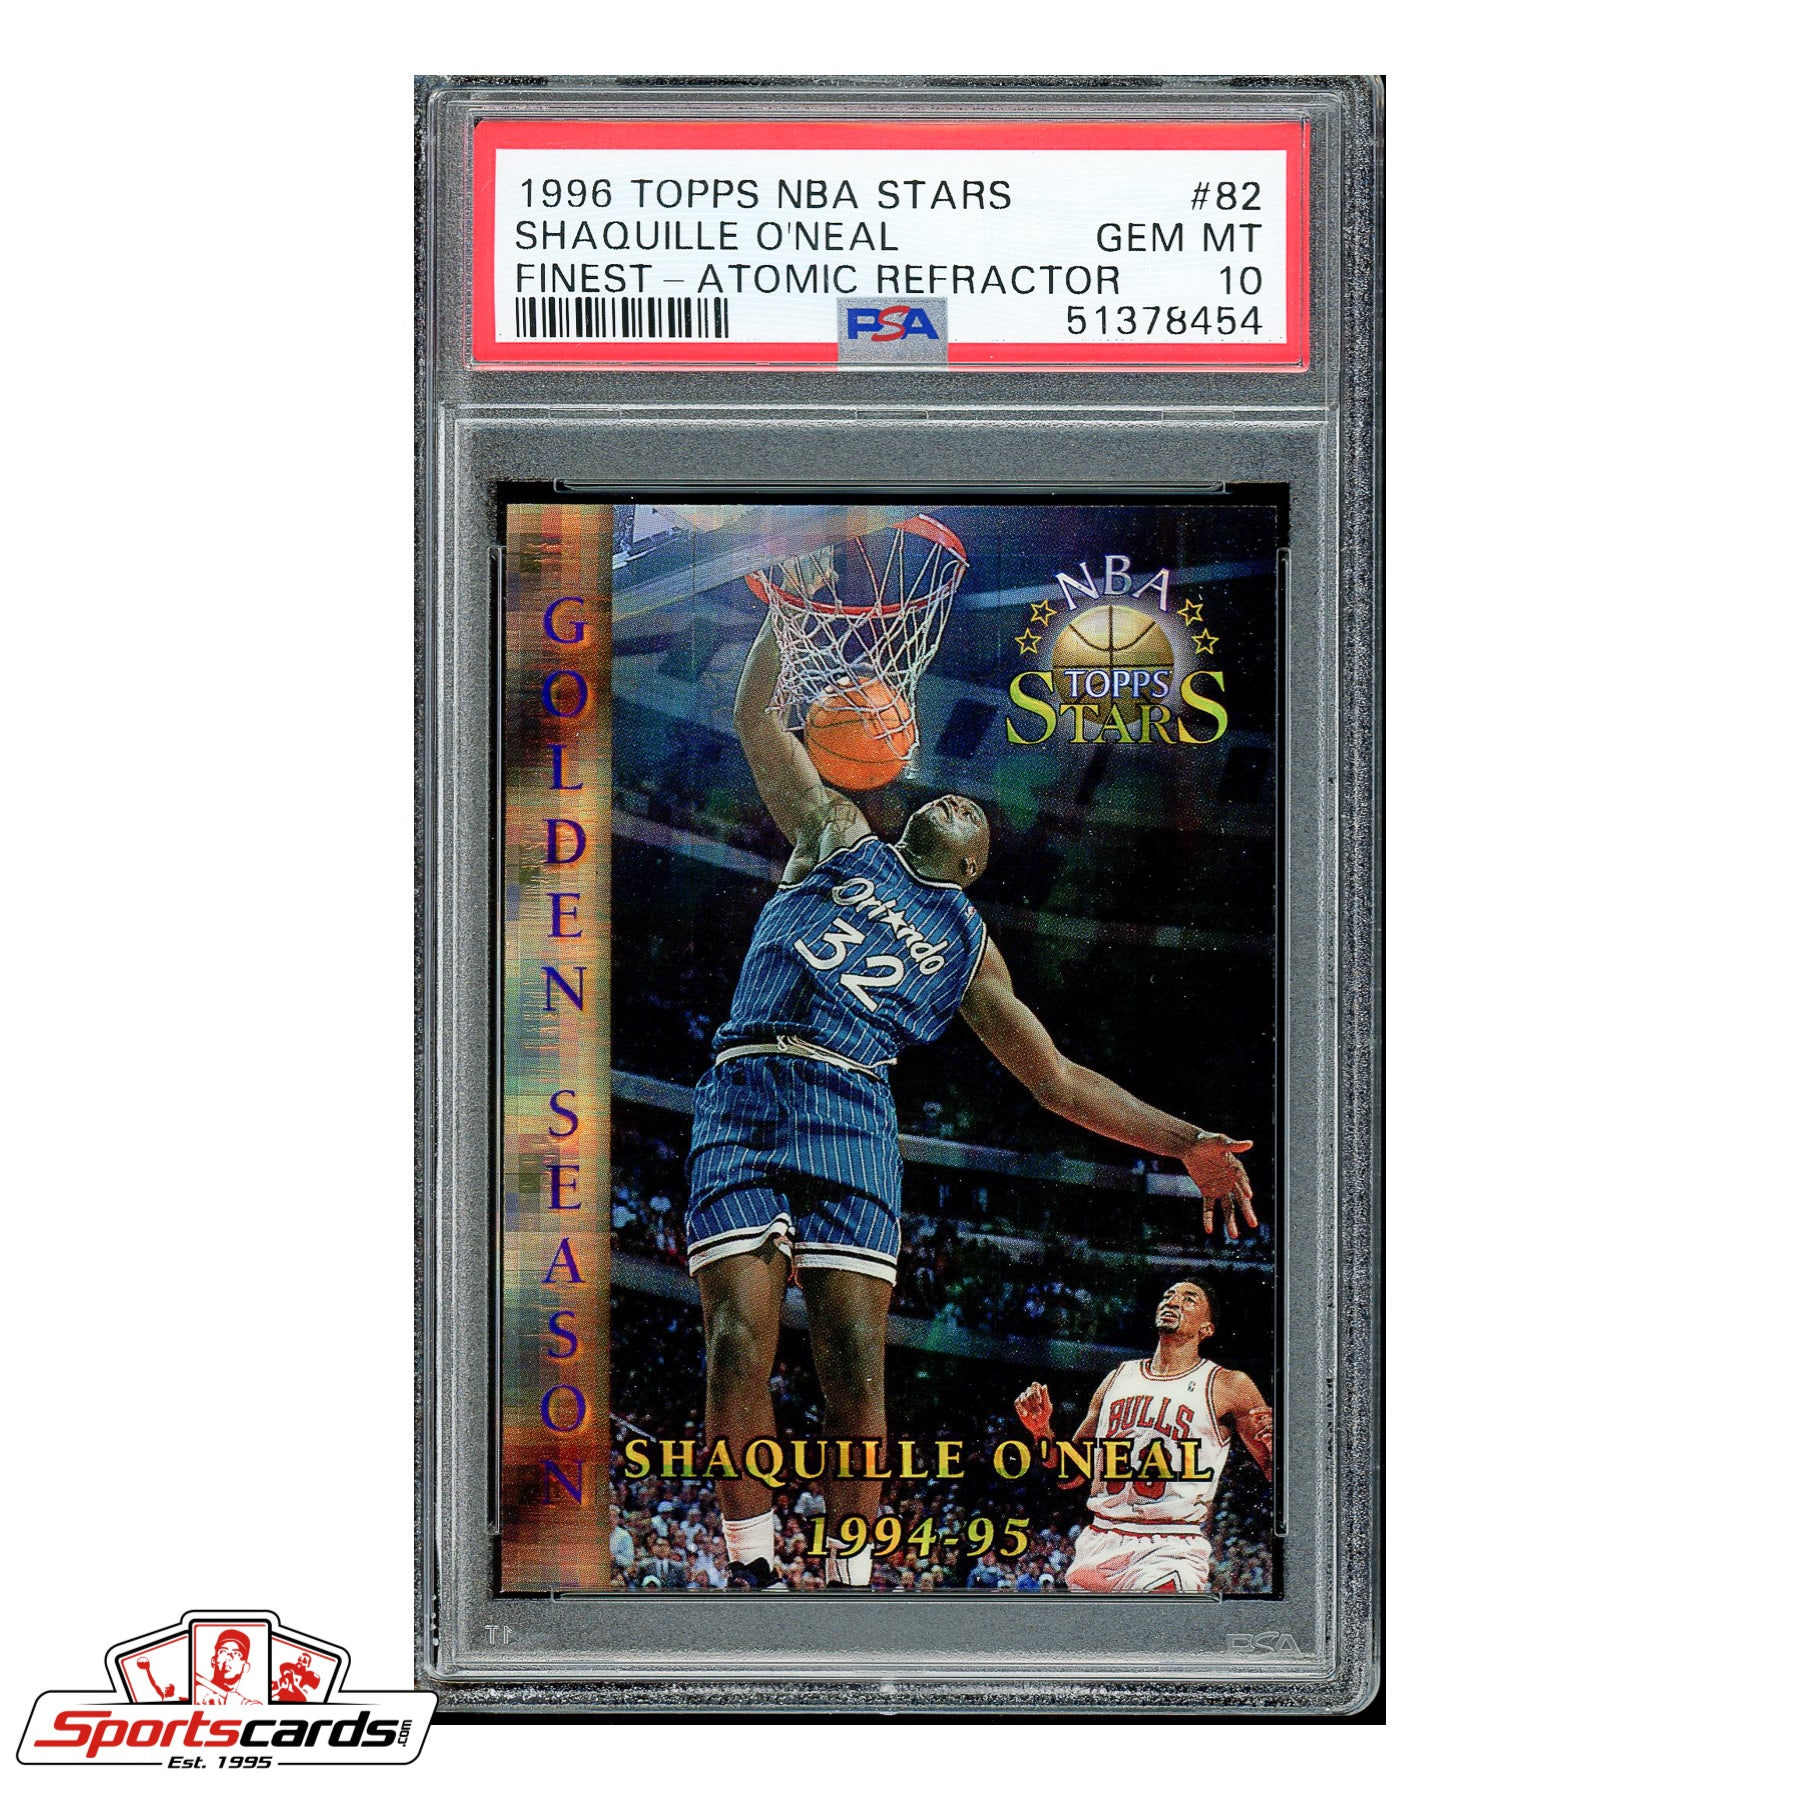 Shaquille O'Neal 1996-97 FINEST MYSTERY REFRACTORS BORDERED #M12 L.A.  LAKERS!